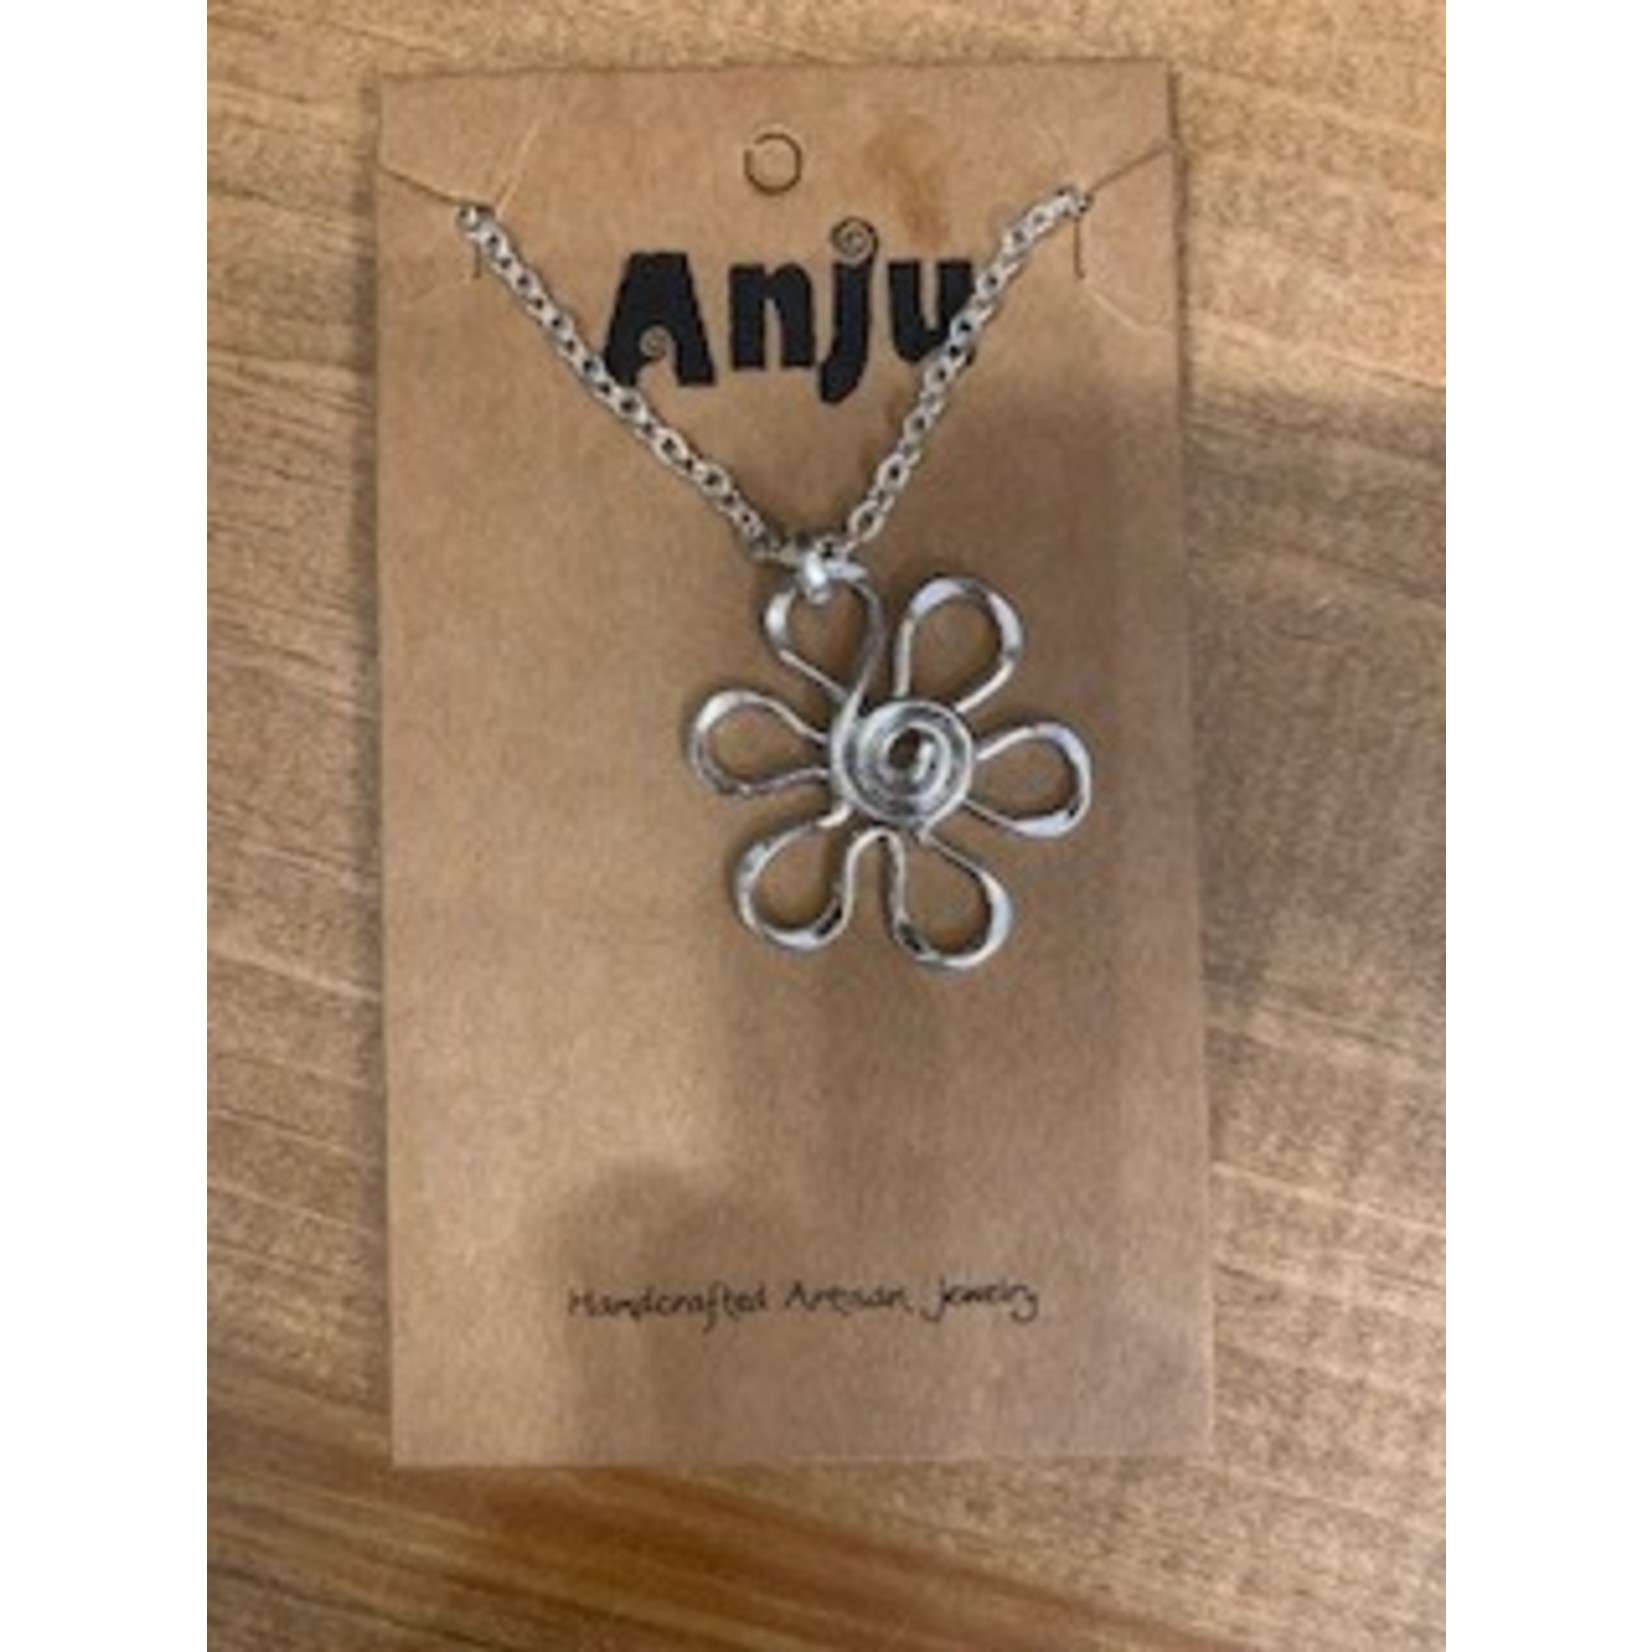 Anju Jewelry Small Silver Plated Necklace - 18" - Daisy